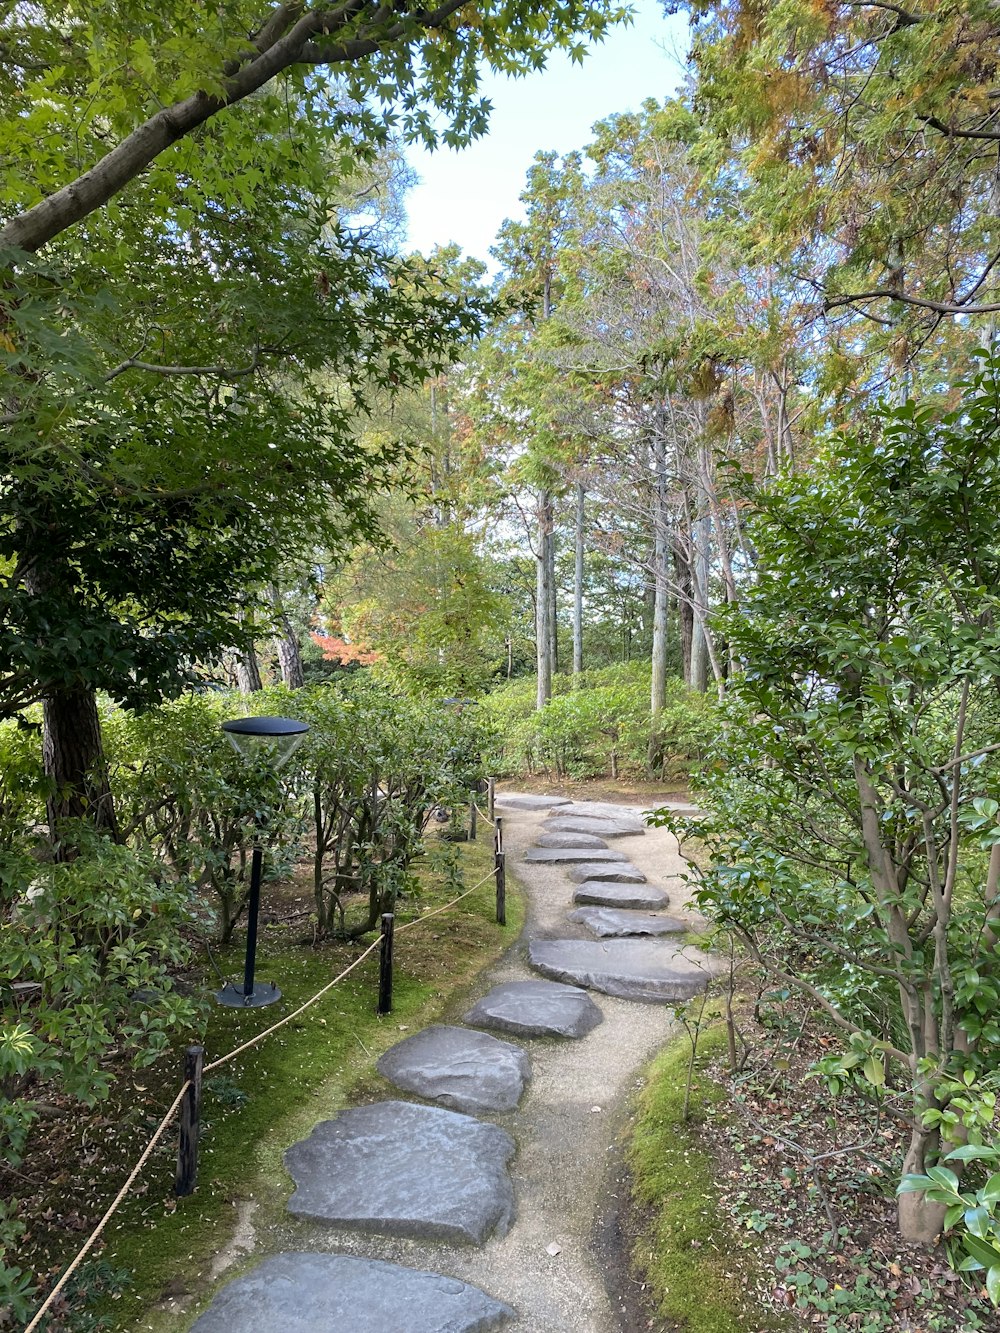 a stone path in the middle of a forest